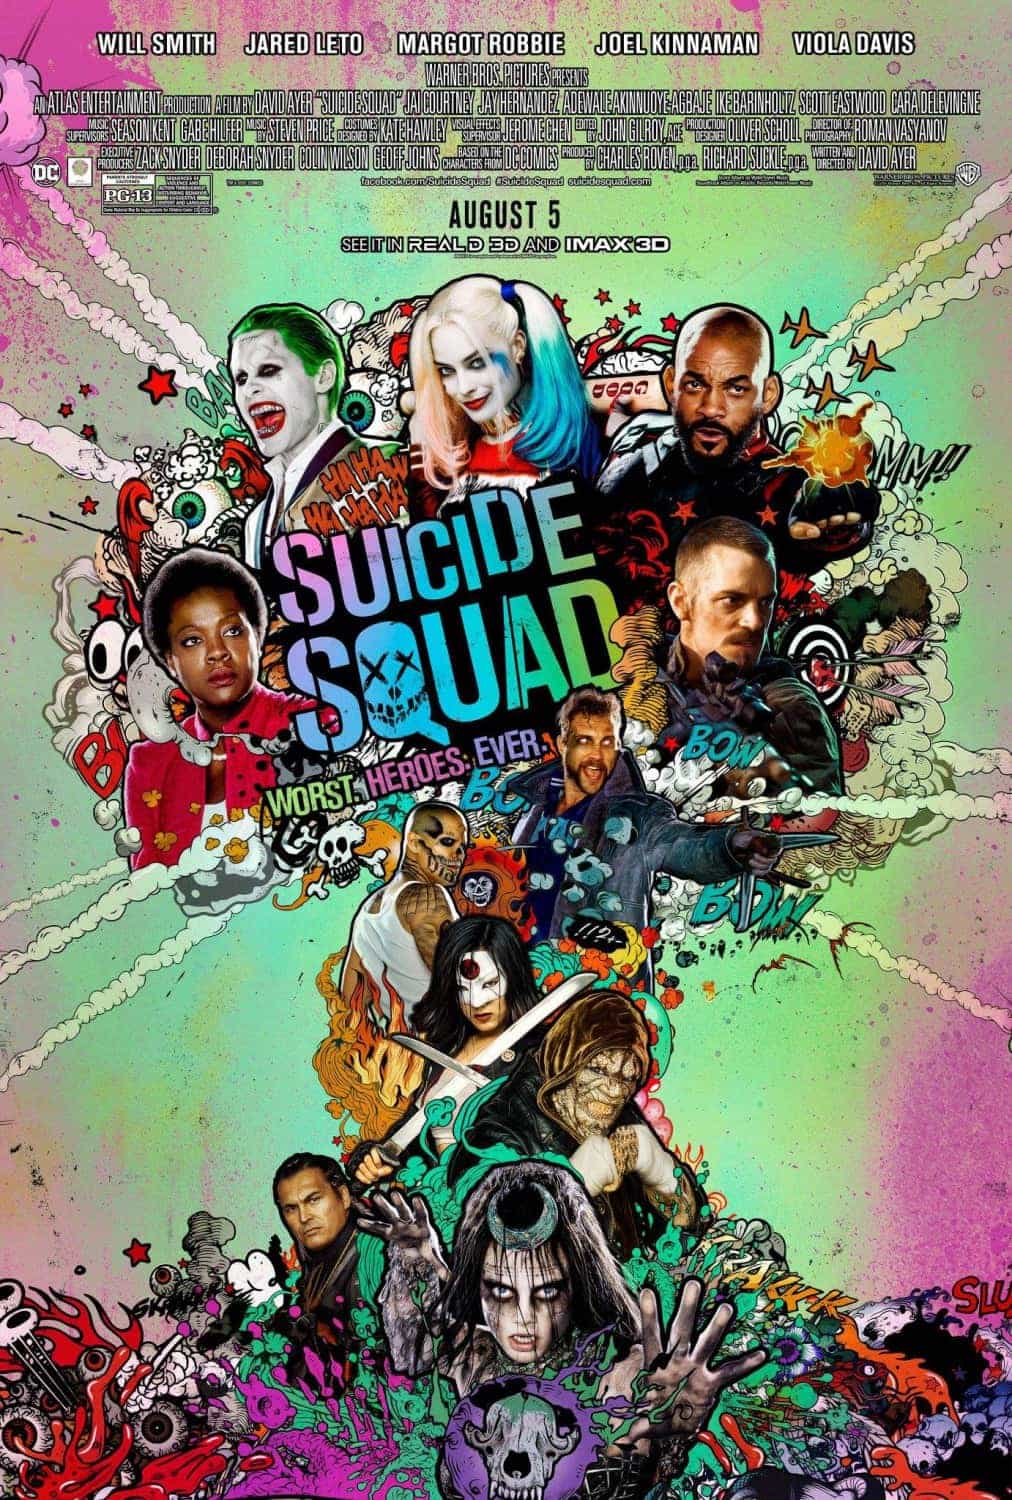 UK Home Video Chart weekending 11th December 2016:  Suicide Squad commits to the top on its debut